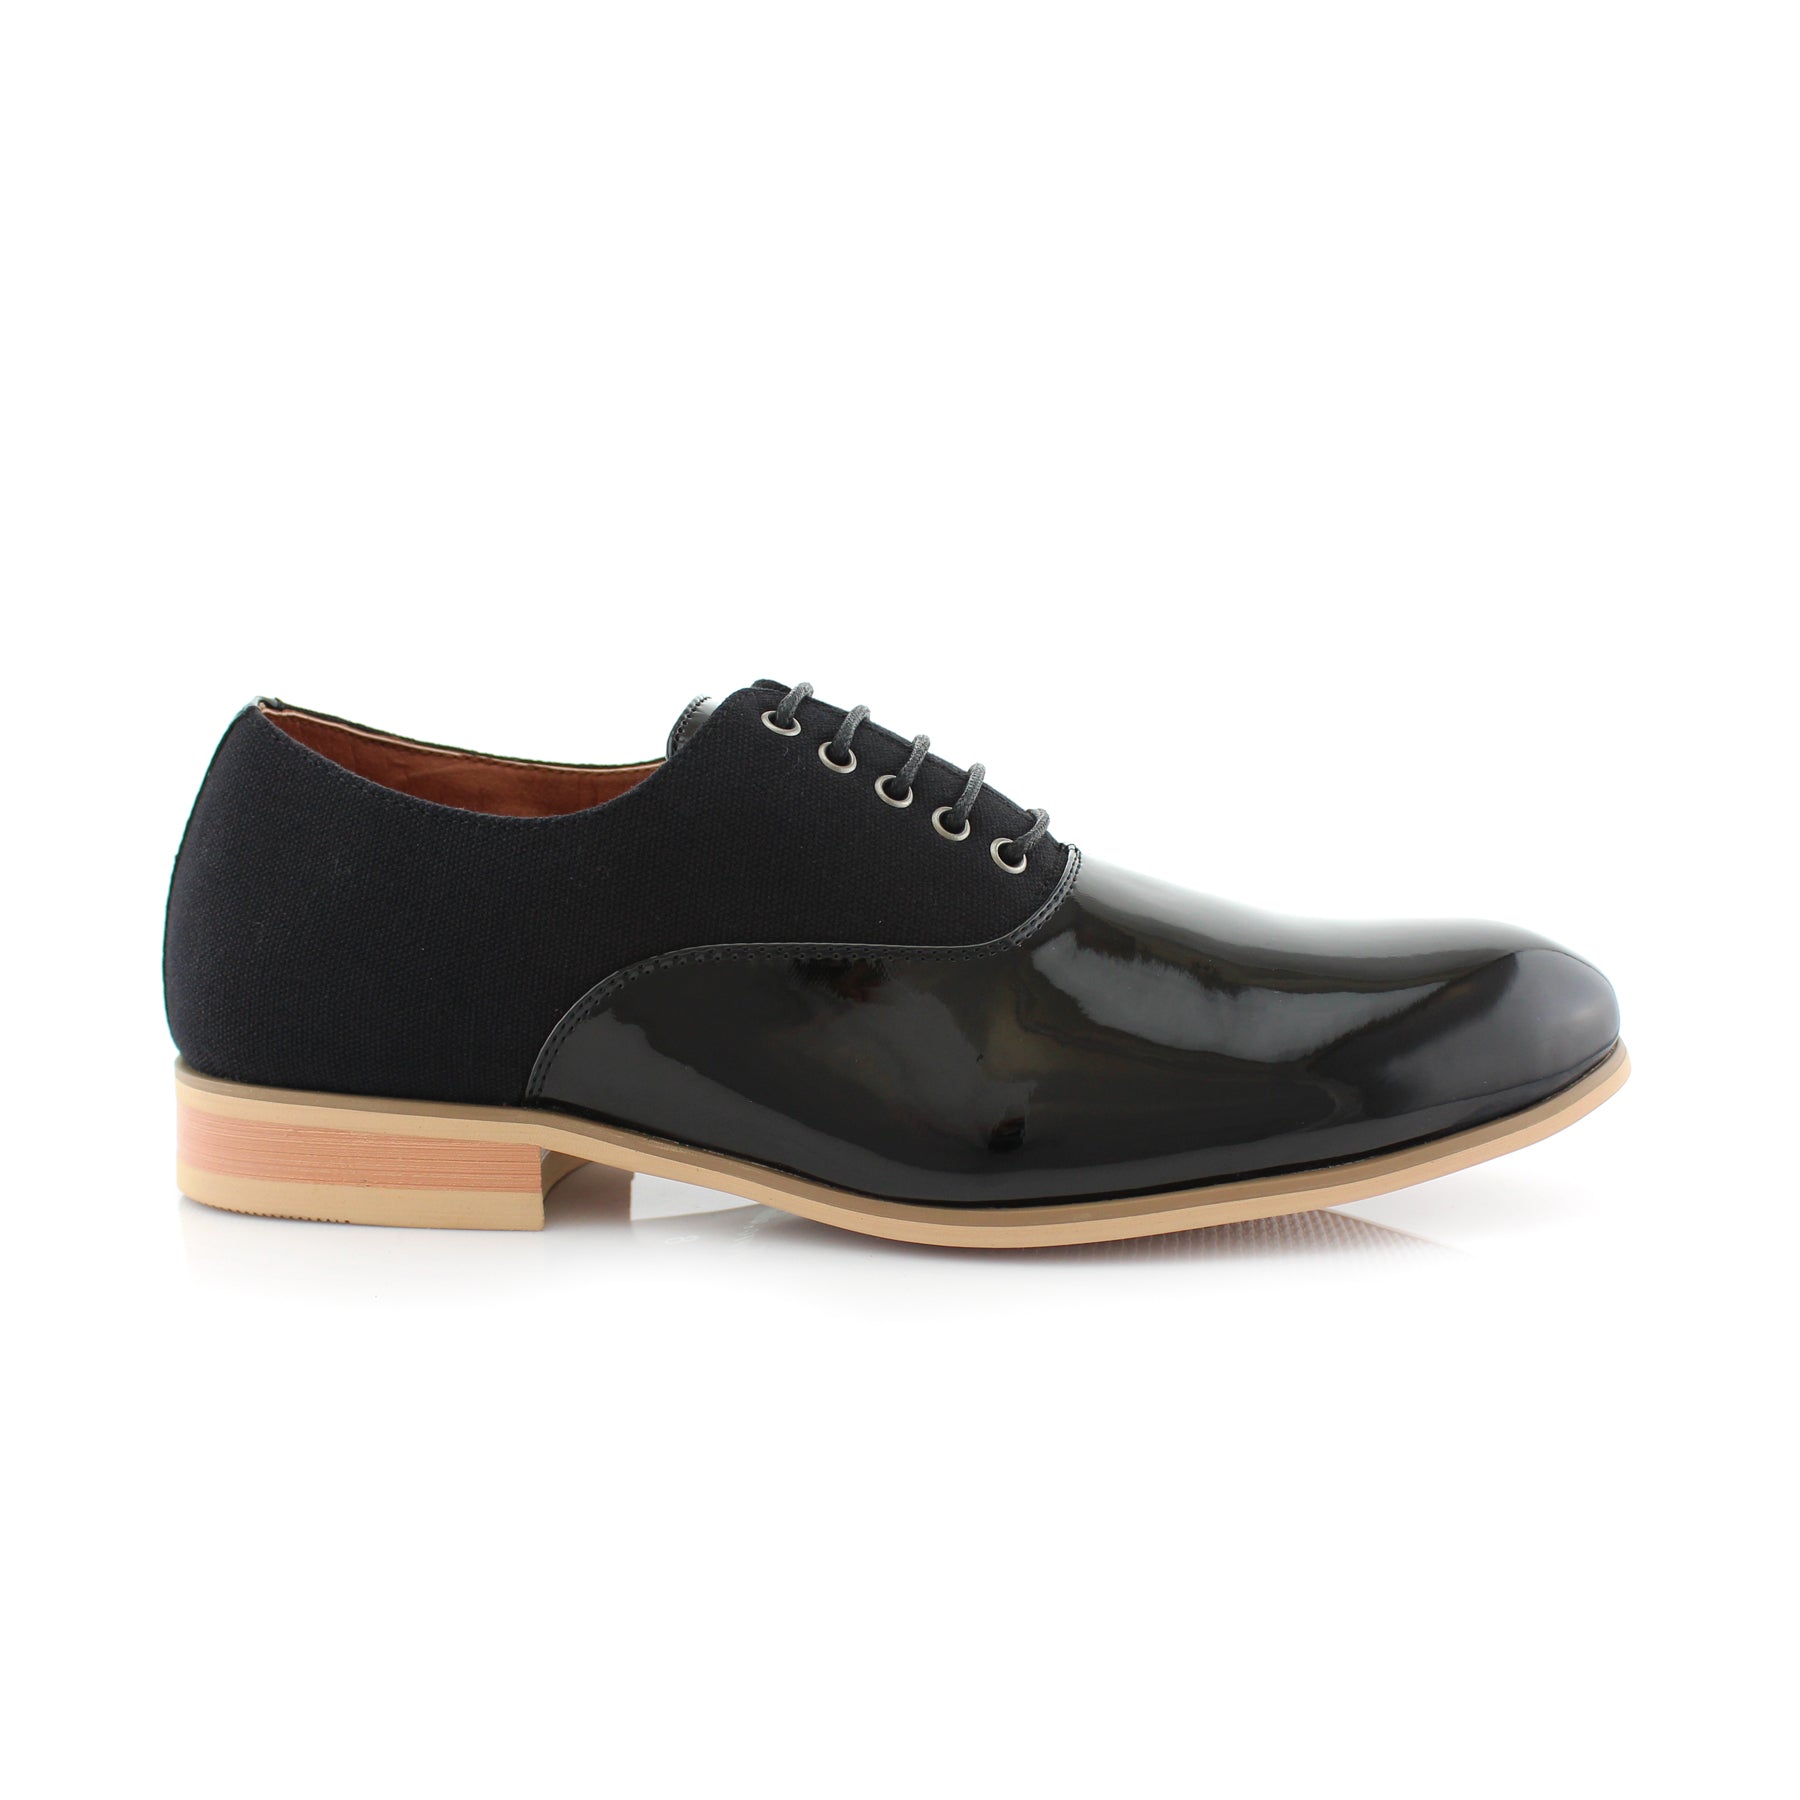 Duo-Textured Oxfords | Marcus by Ferro Aldo | Conal Footwear | Outer Side Angle View